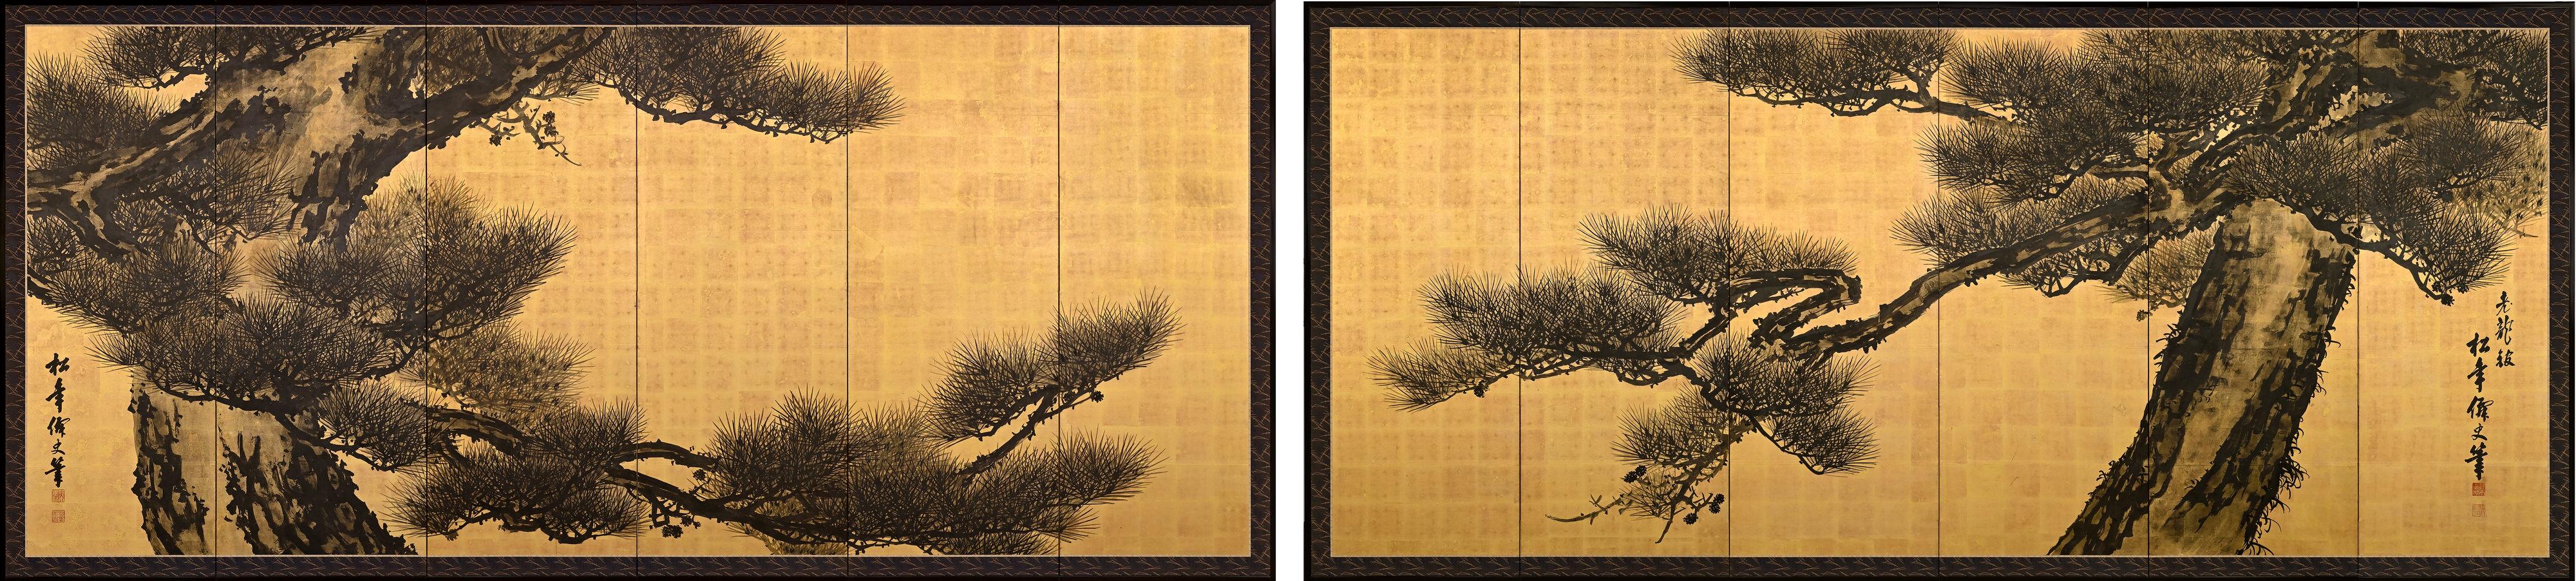 Suzuki Shonen (1848-1918)

Aged Dragons

Meiji period (1868-1912). Circa 1900.

A pair of six-panel Japanese screens. Ink and gold leaf on paper.

As with the pair of Shonen pine screens in the collection of the Indianapolis Museum, this painting's